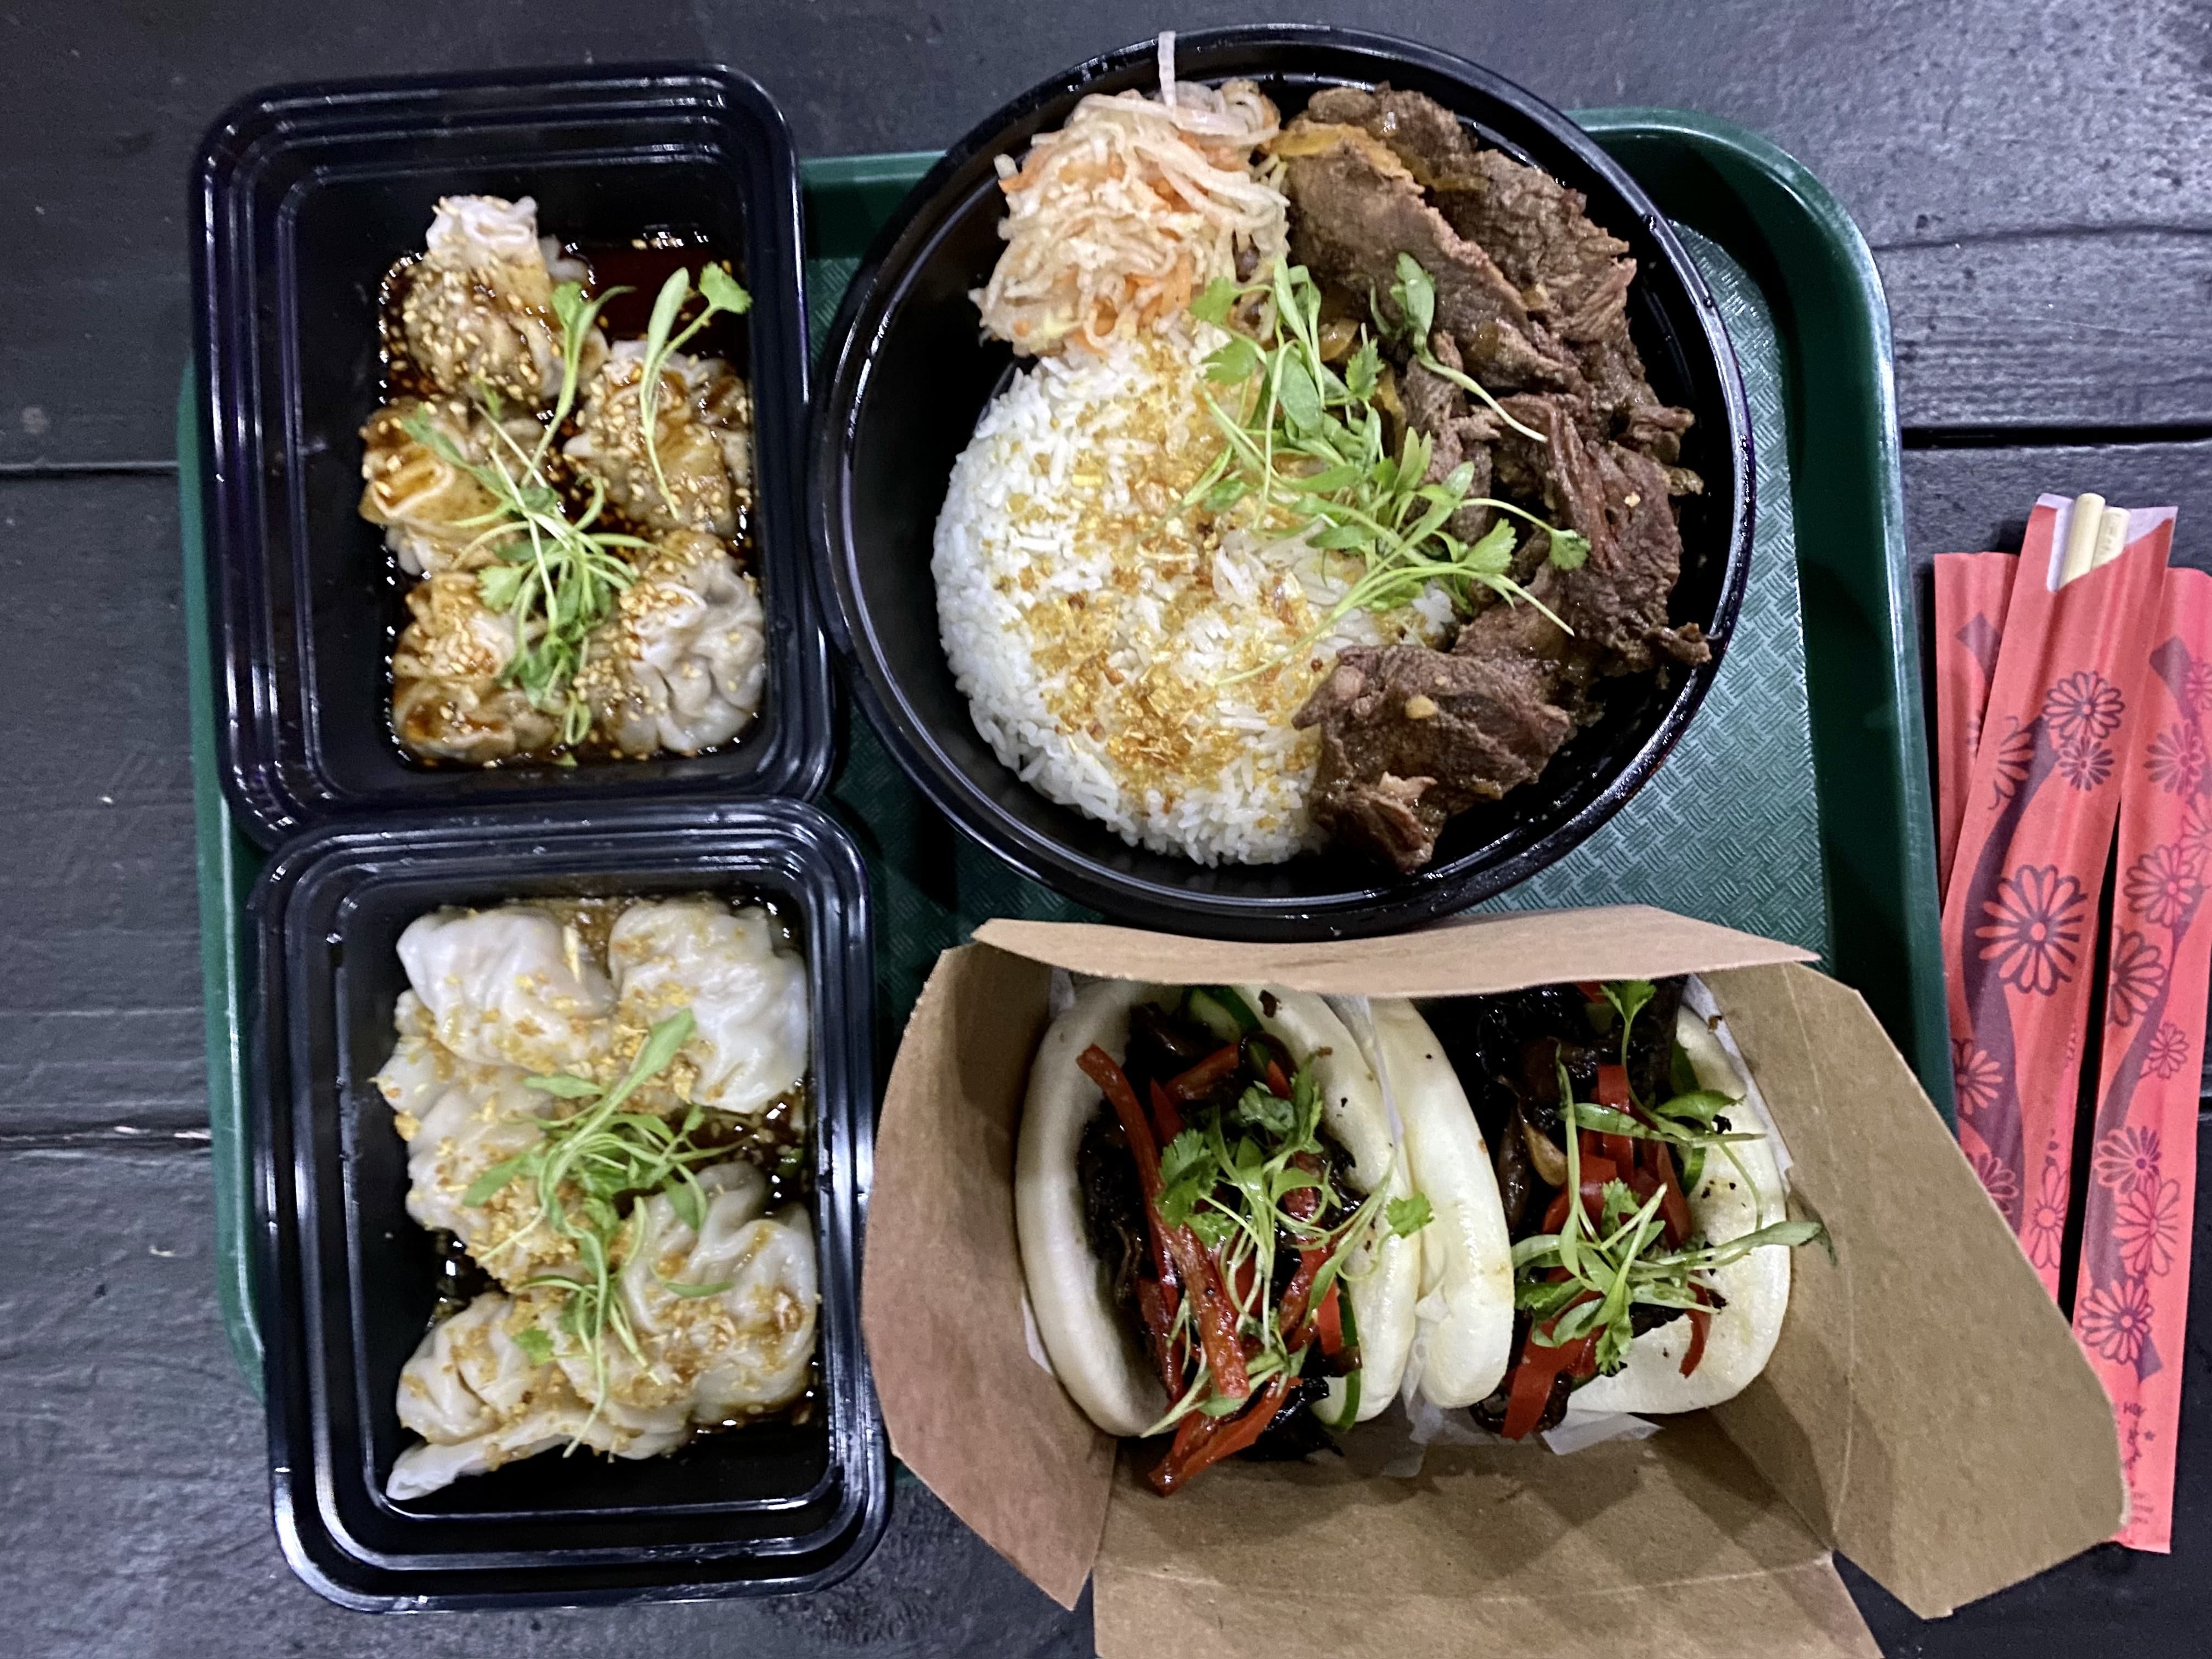 Food from Lucky Tigre, a new Filipino restaurant in South Tampa.